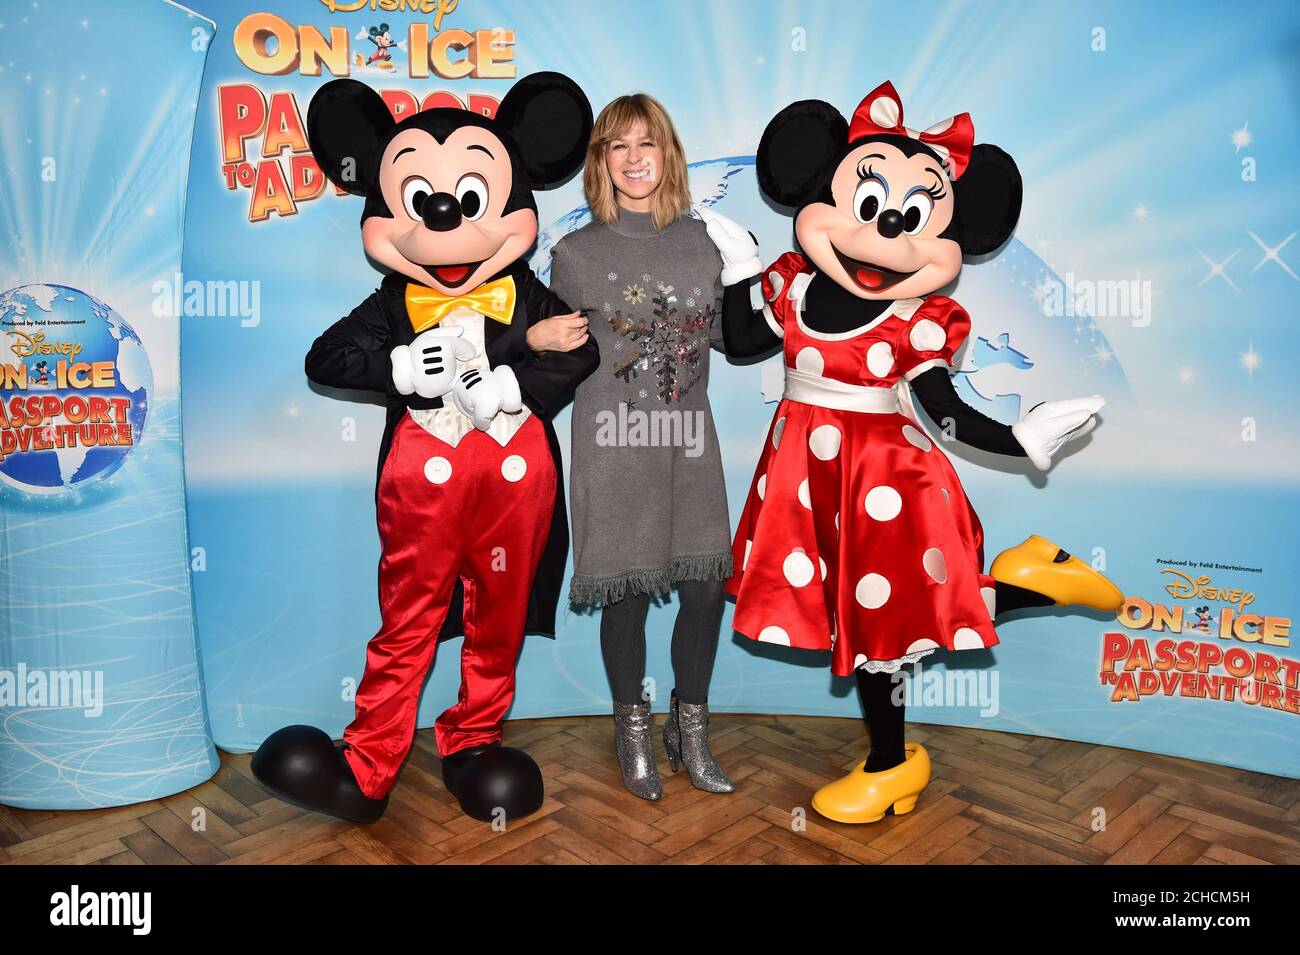 Kate Garraway meets Mickey and Minnie Mouse at the opening night of Disney On Ice Passport to Adventure at the O2 Arena from December 20th until December 30th, London. Stock Photo